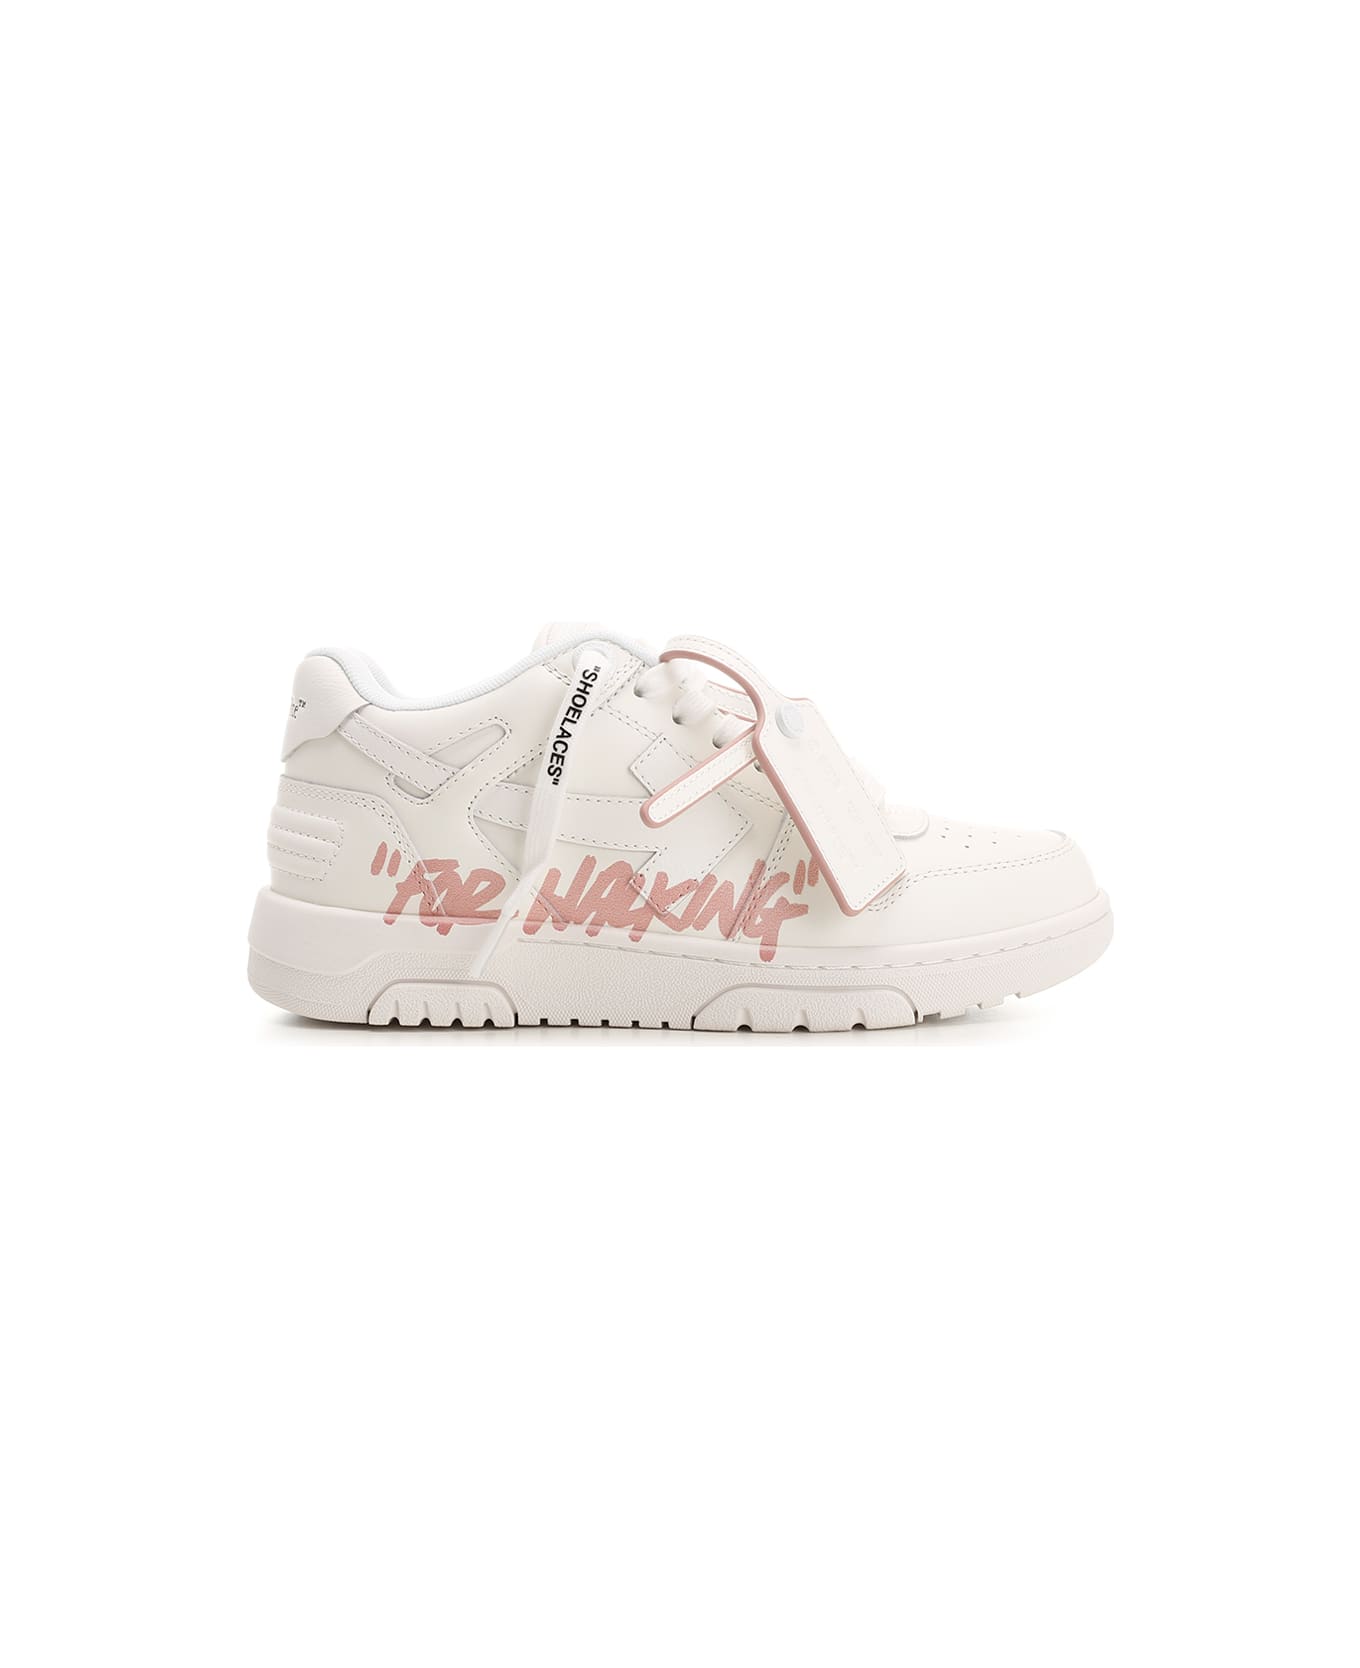 Off-White Out Of Office For Walking Sneakers - White Pink